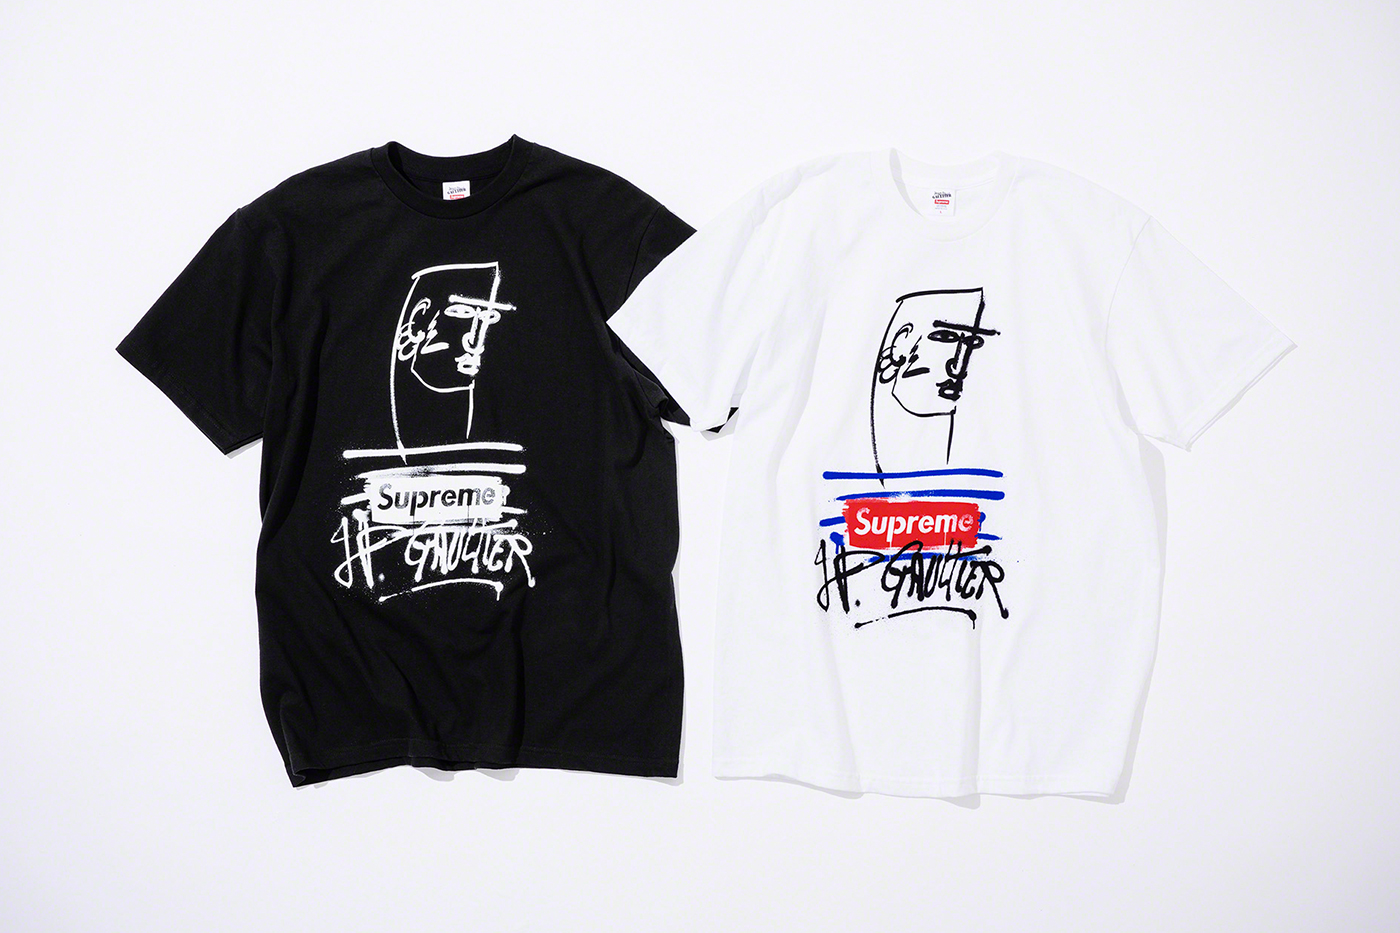 Supreme x Jean Paul Gaultier 2019 Spring/Summer Collection